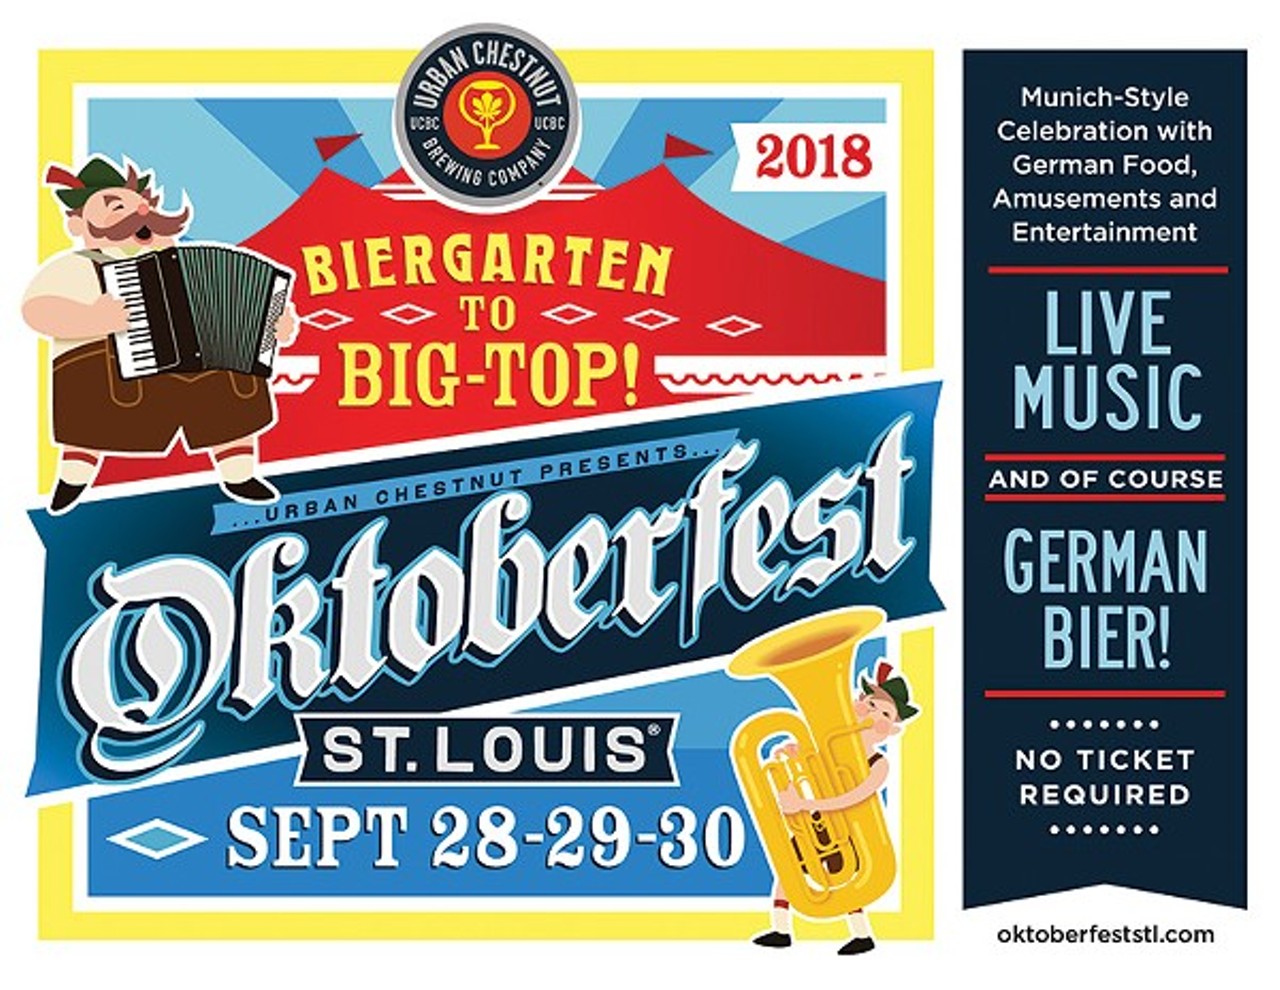 Oktoberfest St. Louis
September 28, 2018
This three-day beer festival is free and features a full lineup of rock, blues, polka and club music on two stages. Here you can sip some brew and even catch acts by Circus Flora performers, too.
Check it out here.
Photo courtesy of ashleyucbc